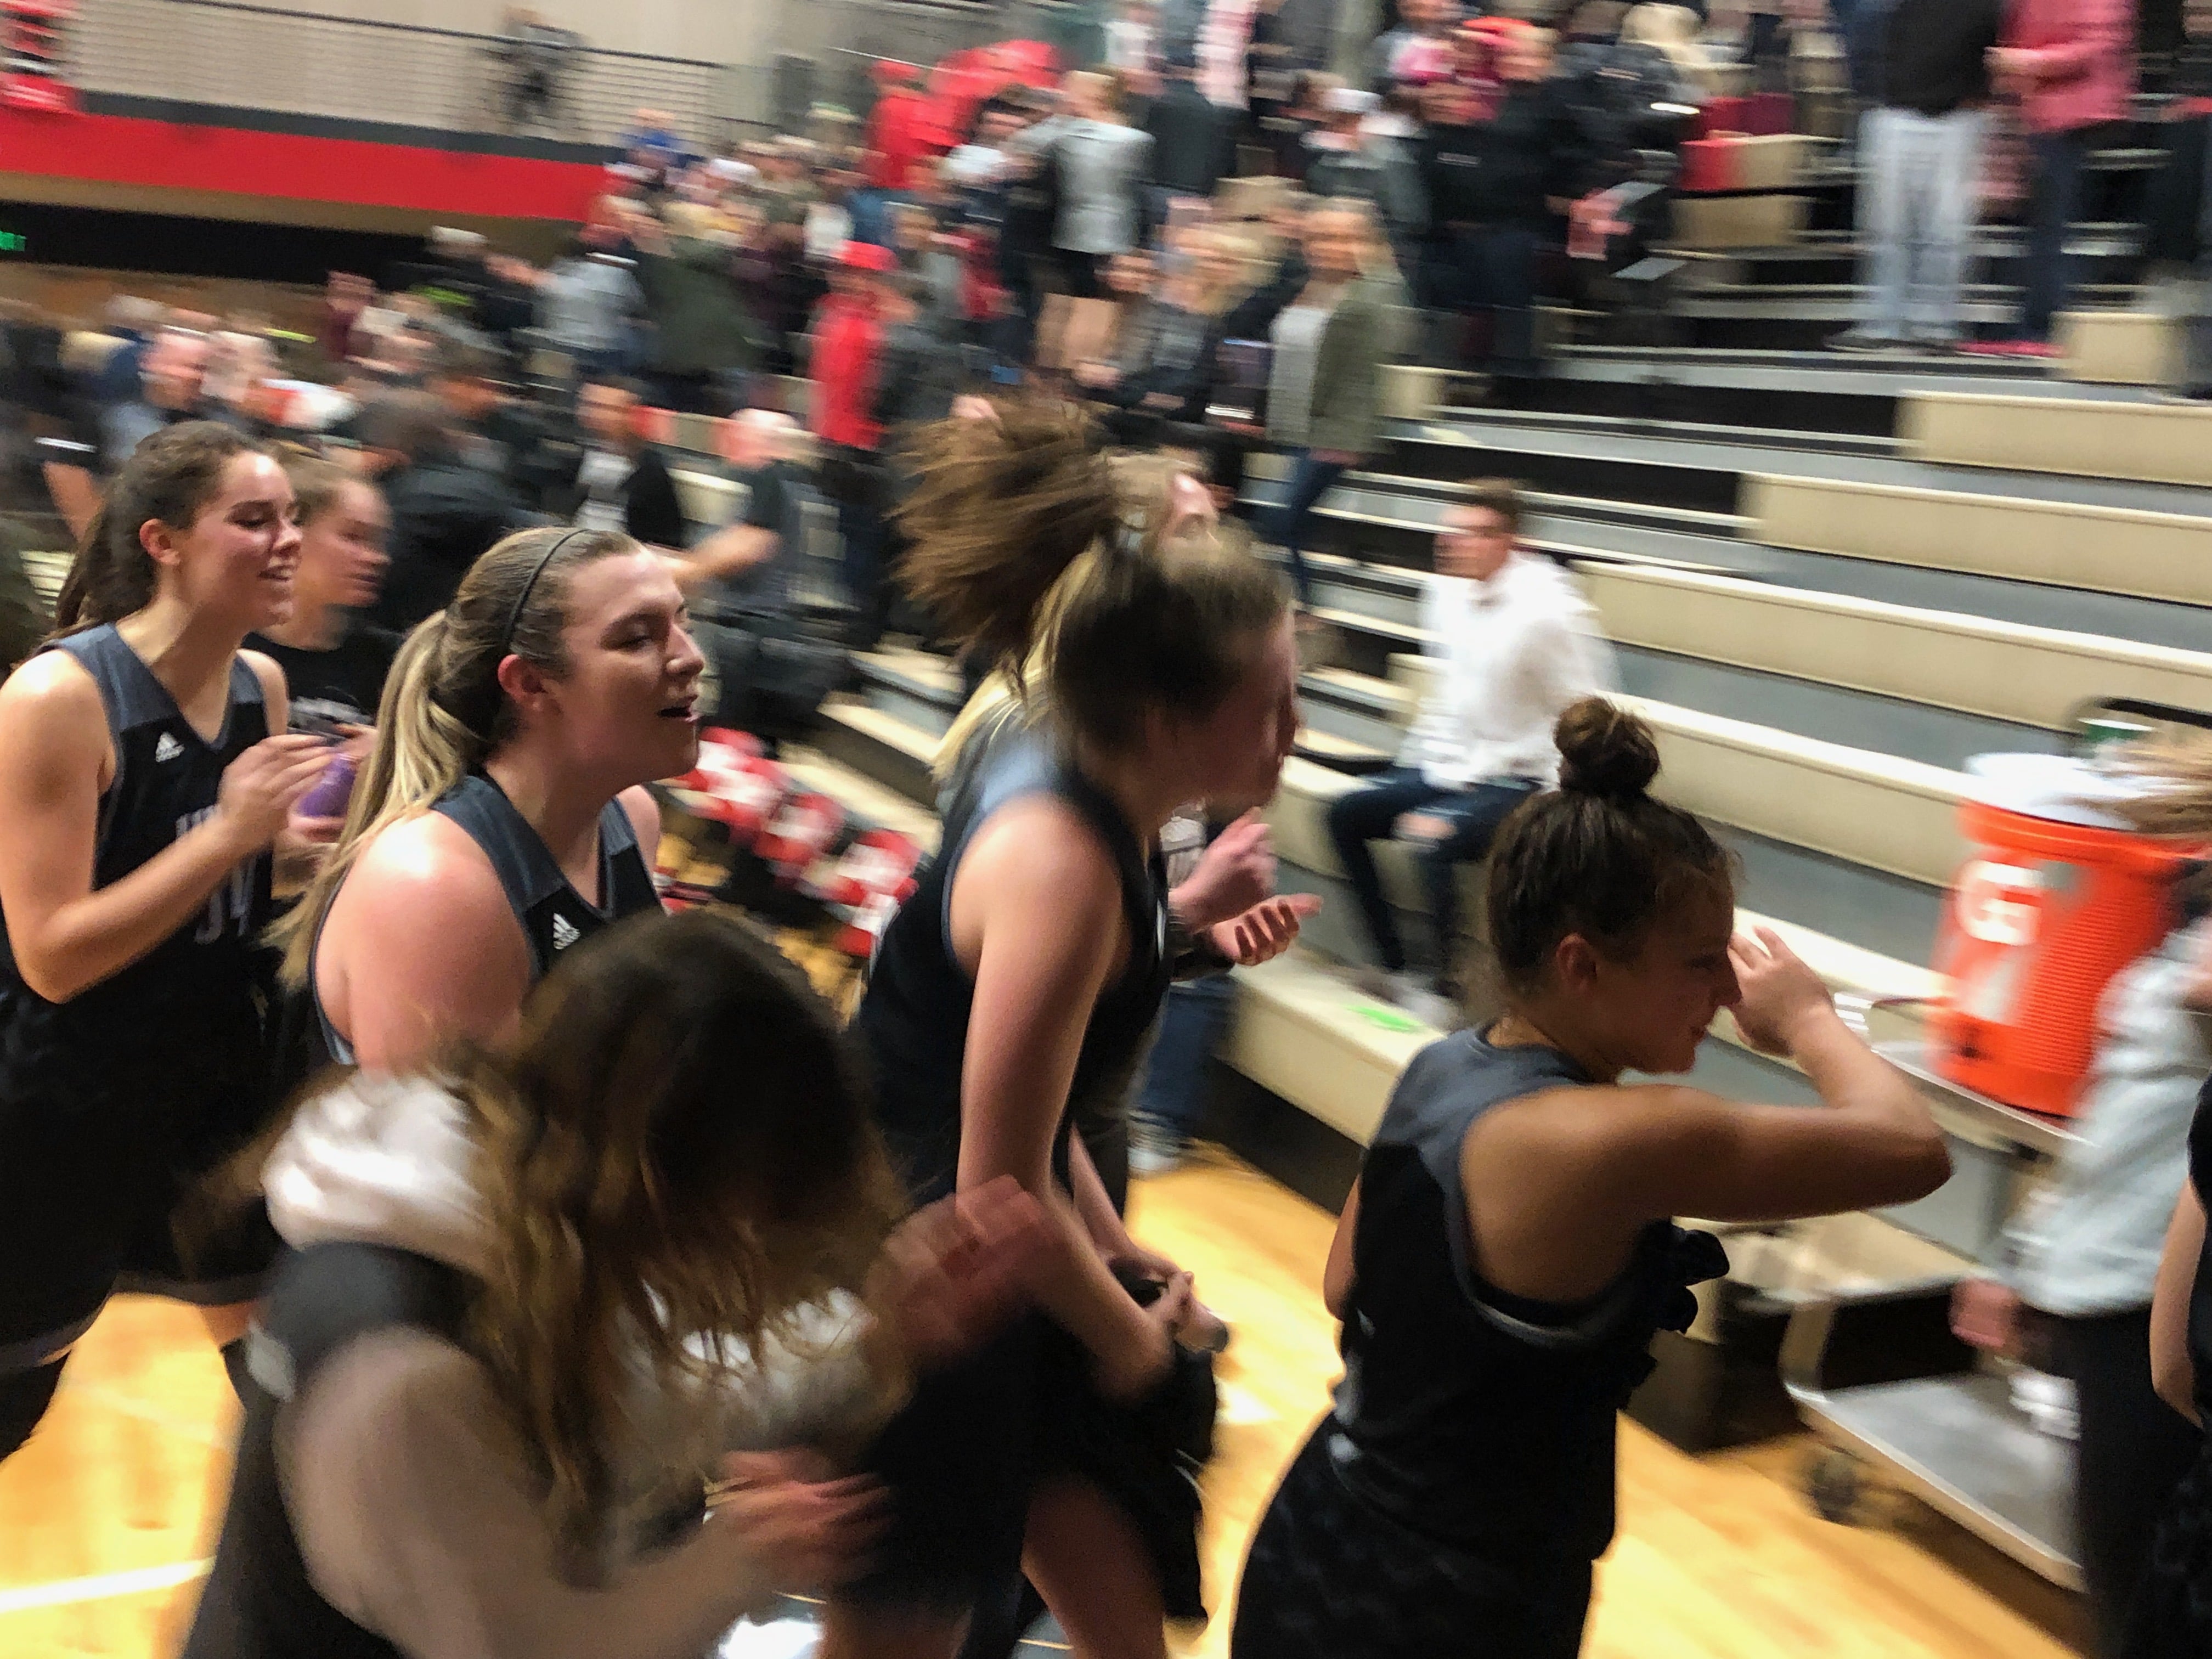 The Union girls basketball team celebrates while exiting the floor after a 53-44 win at Camas on Friday night.